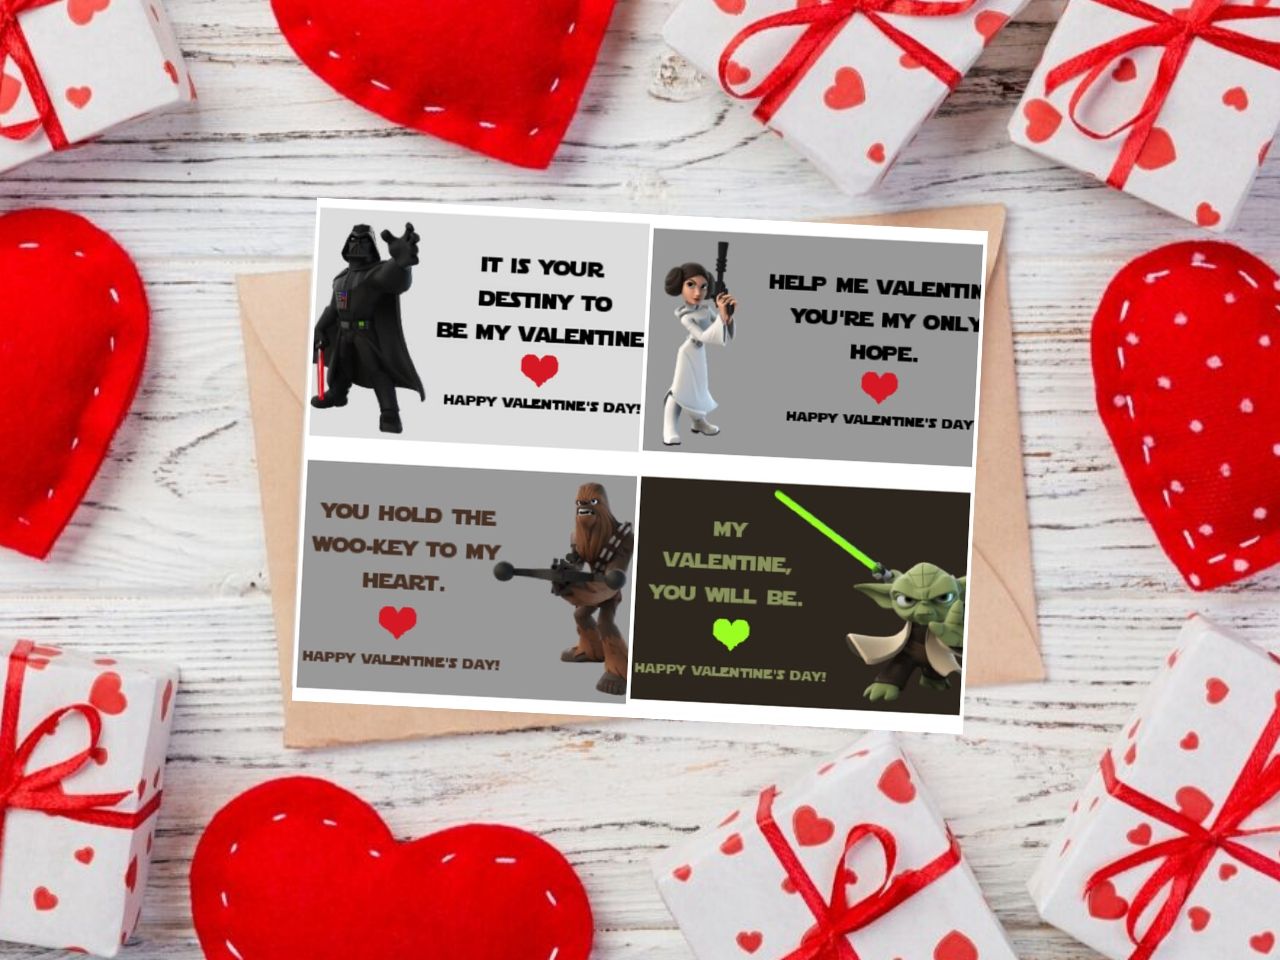 Group of 4 star wars cards.